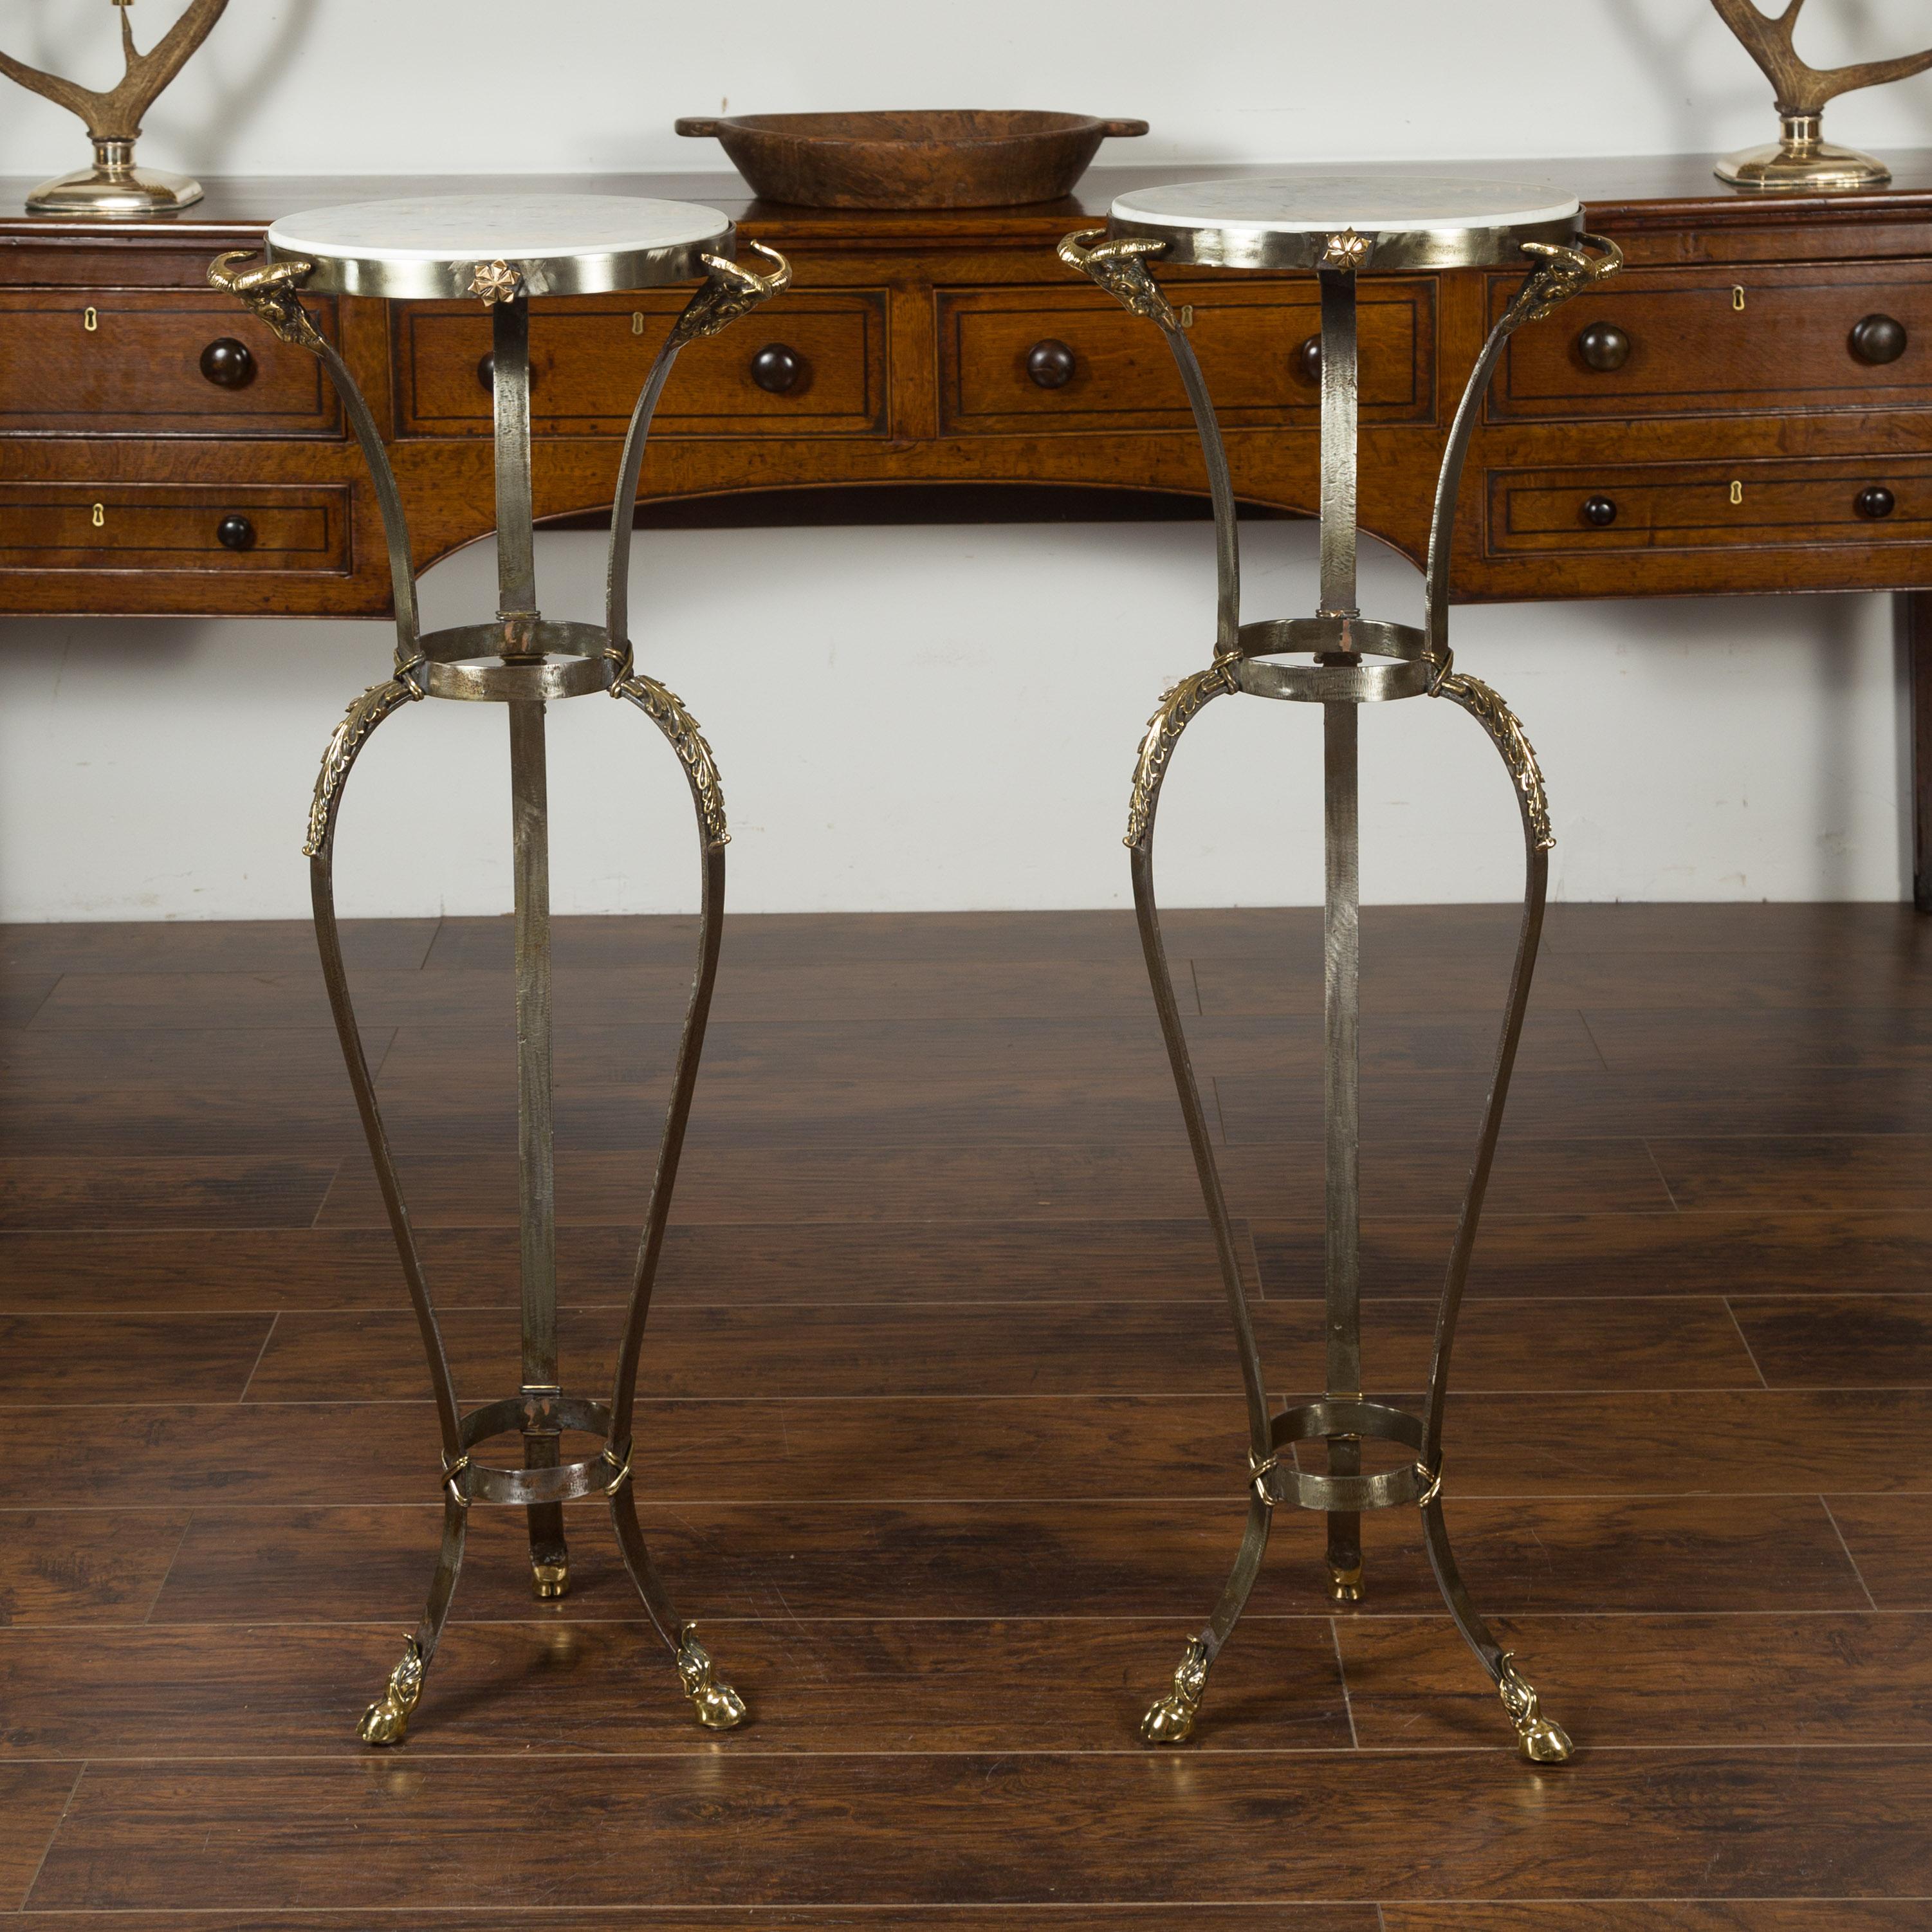 20th Century Pair of Italian Steel and Brass Pedestals with Marble Tops and Ram's Heads For Sale